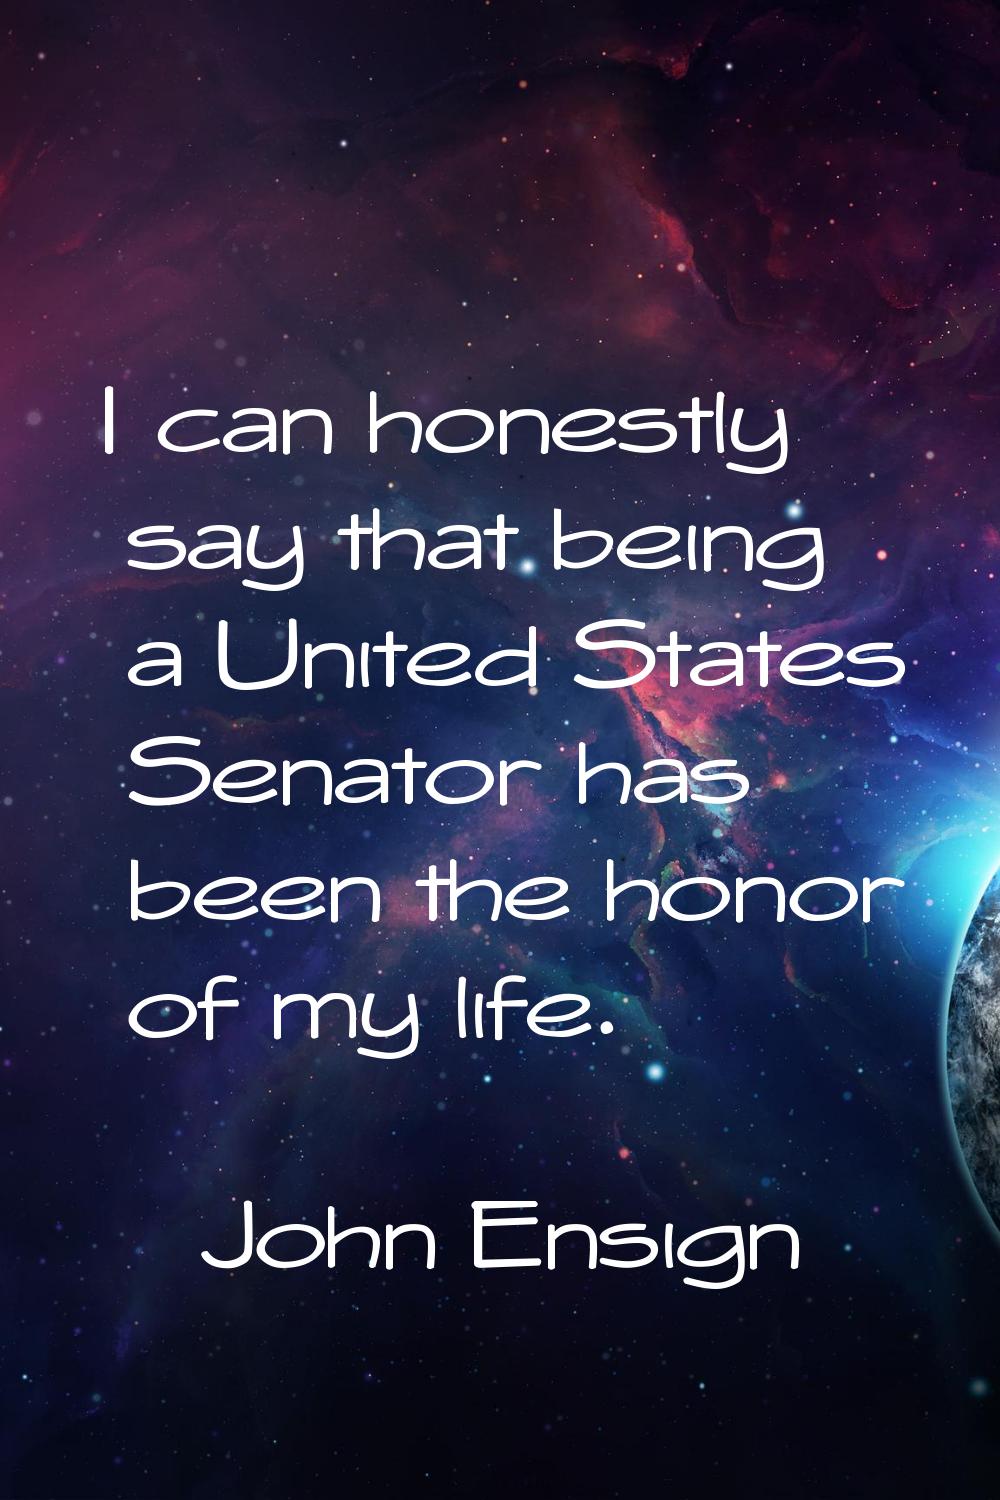 I can honestly say that being a United States Senator has been the honor of my life.